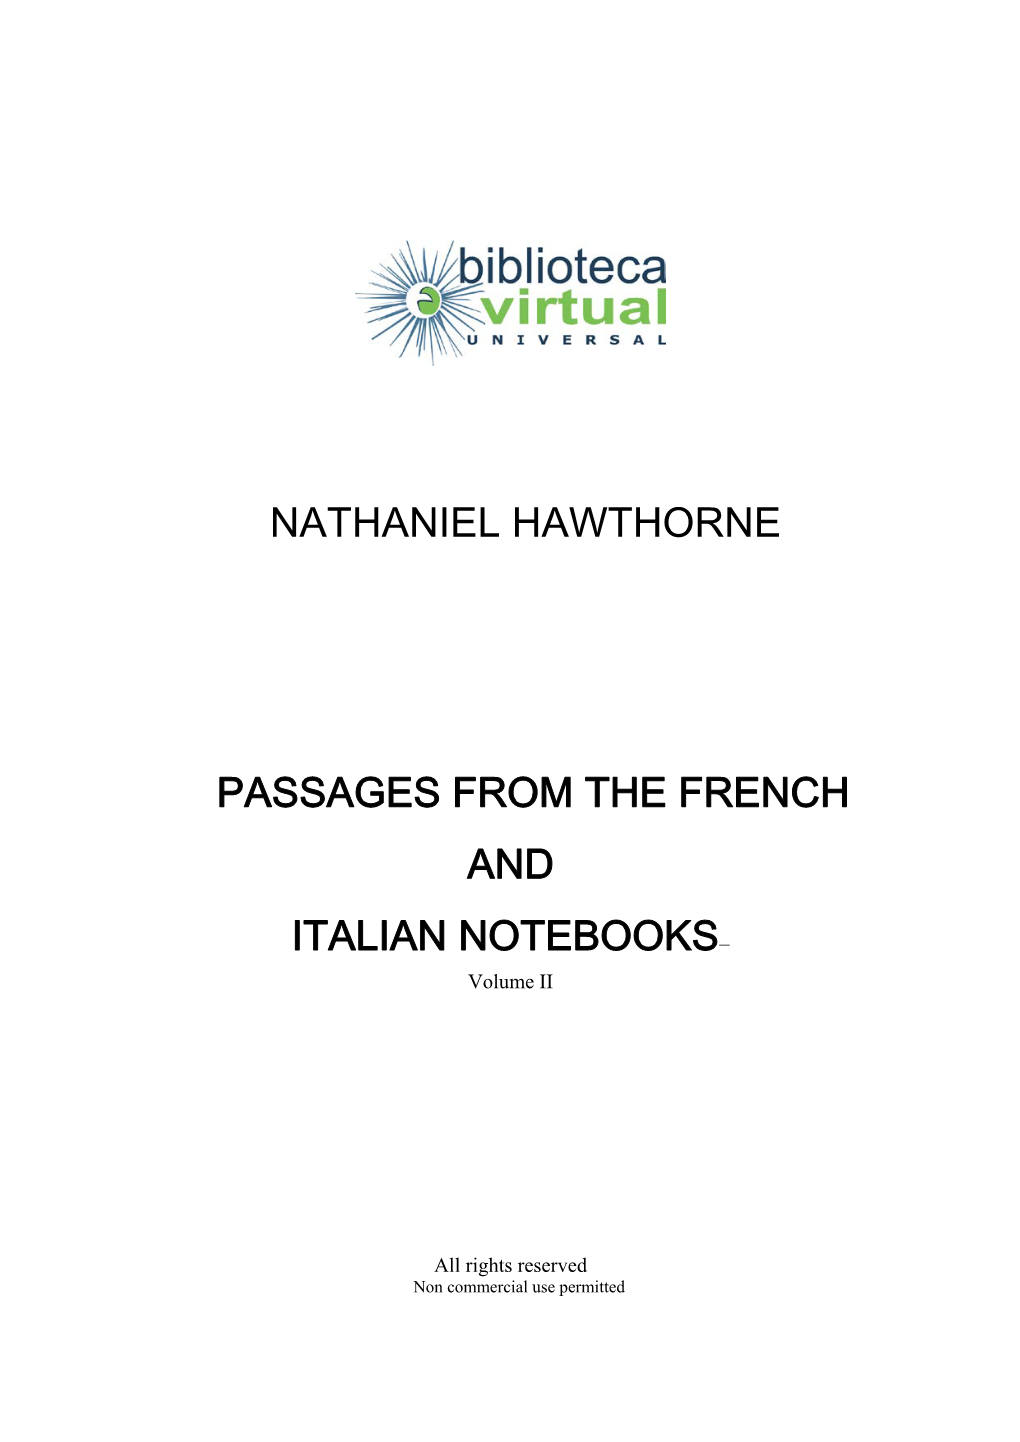 Nathaniel Hawthorne Passages from the French